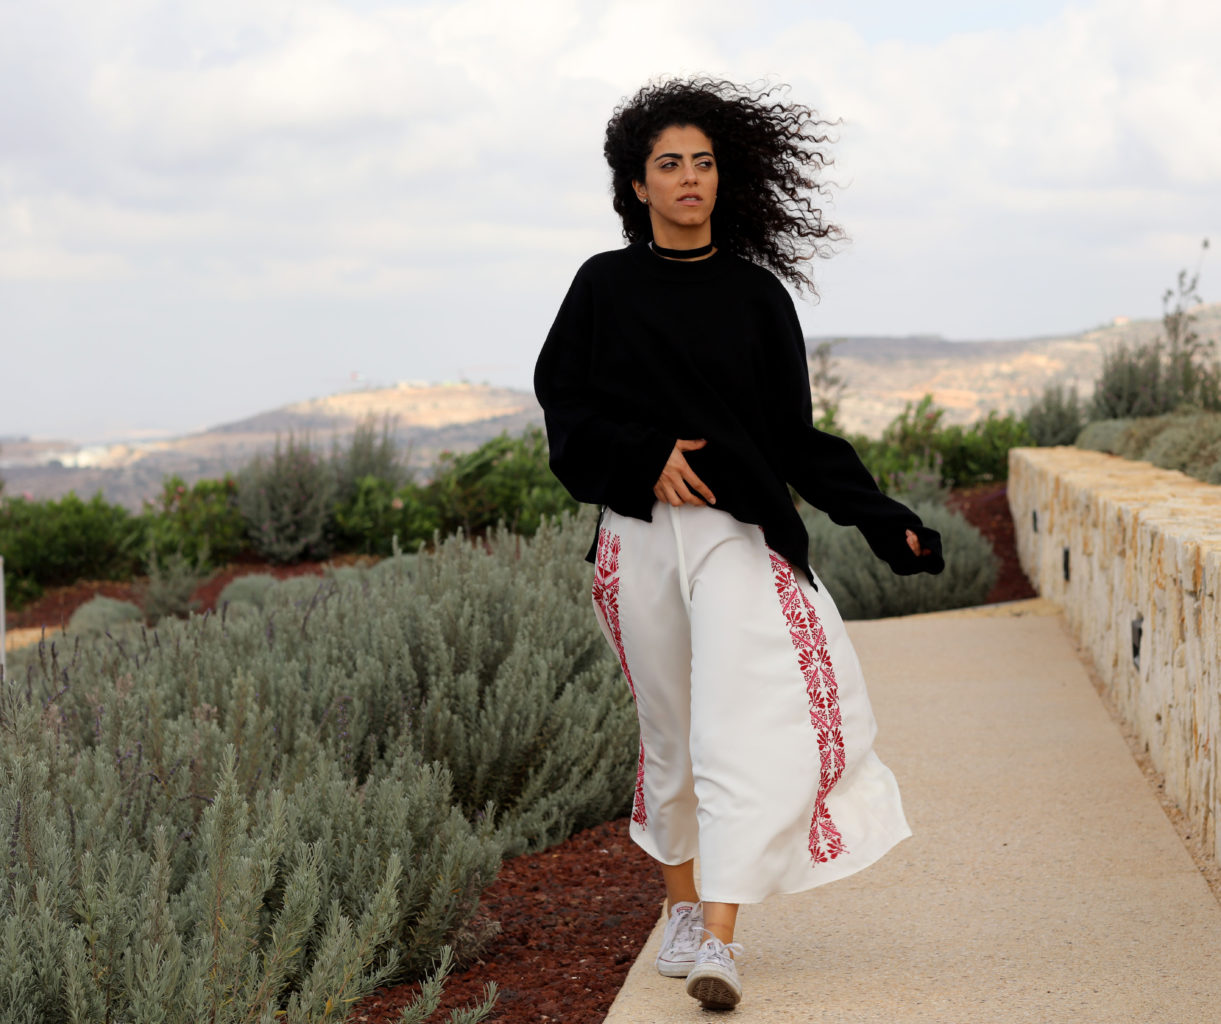 Palestinian heritage lives on through hand-stitched clothing | The Switchers